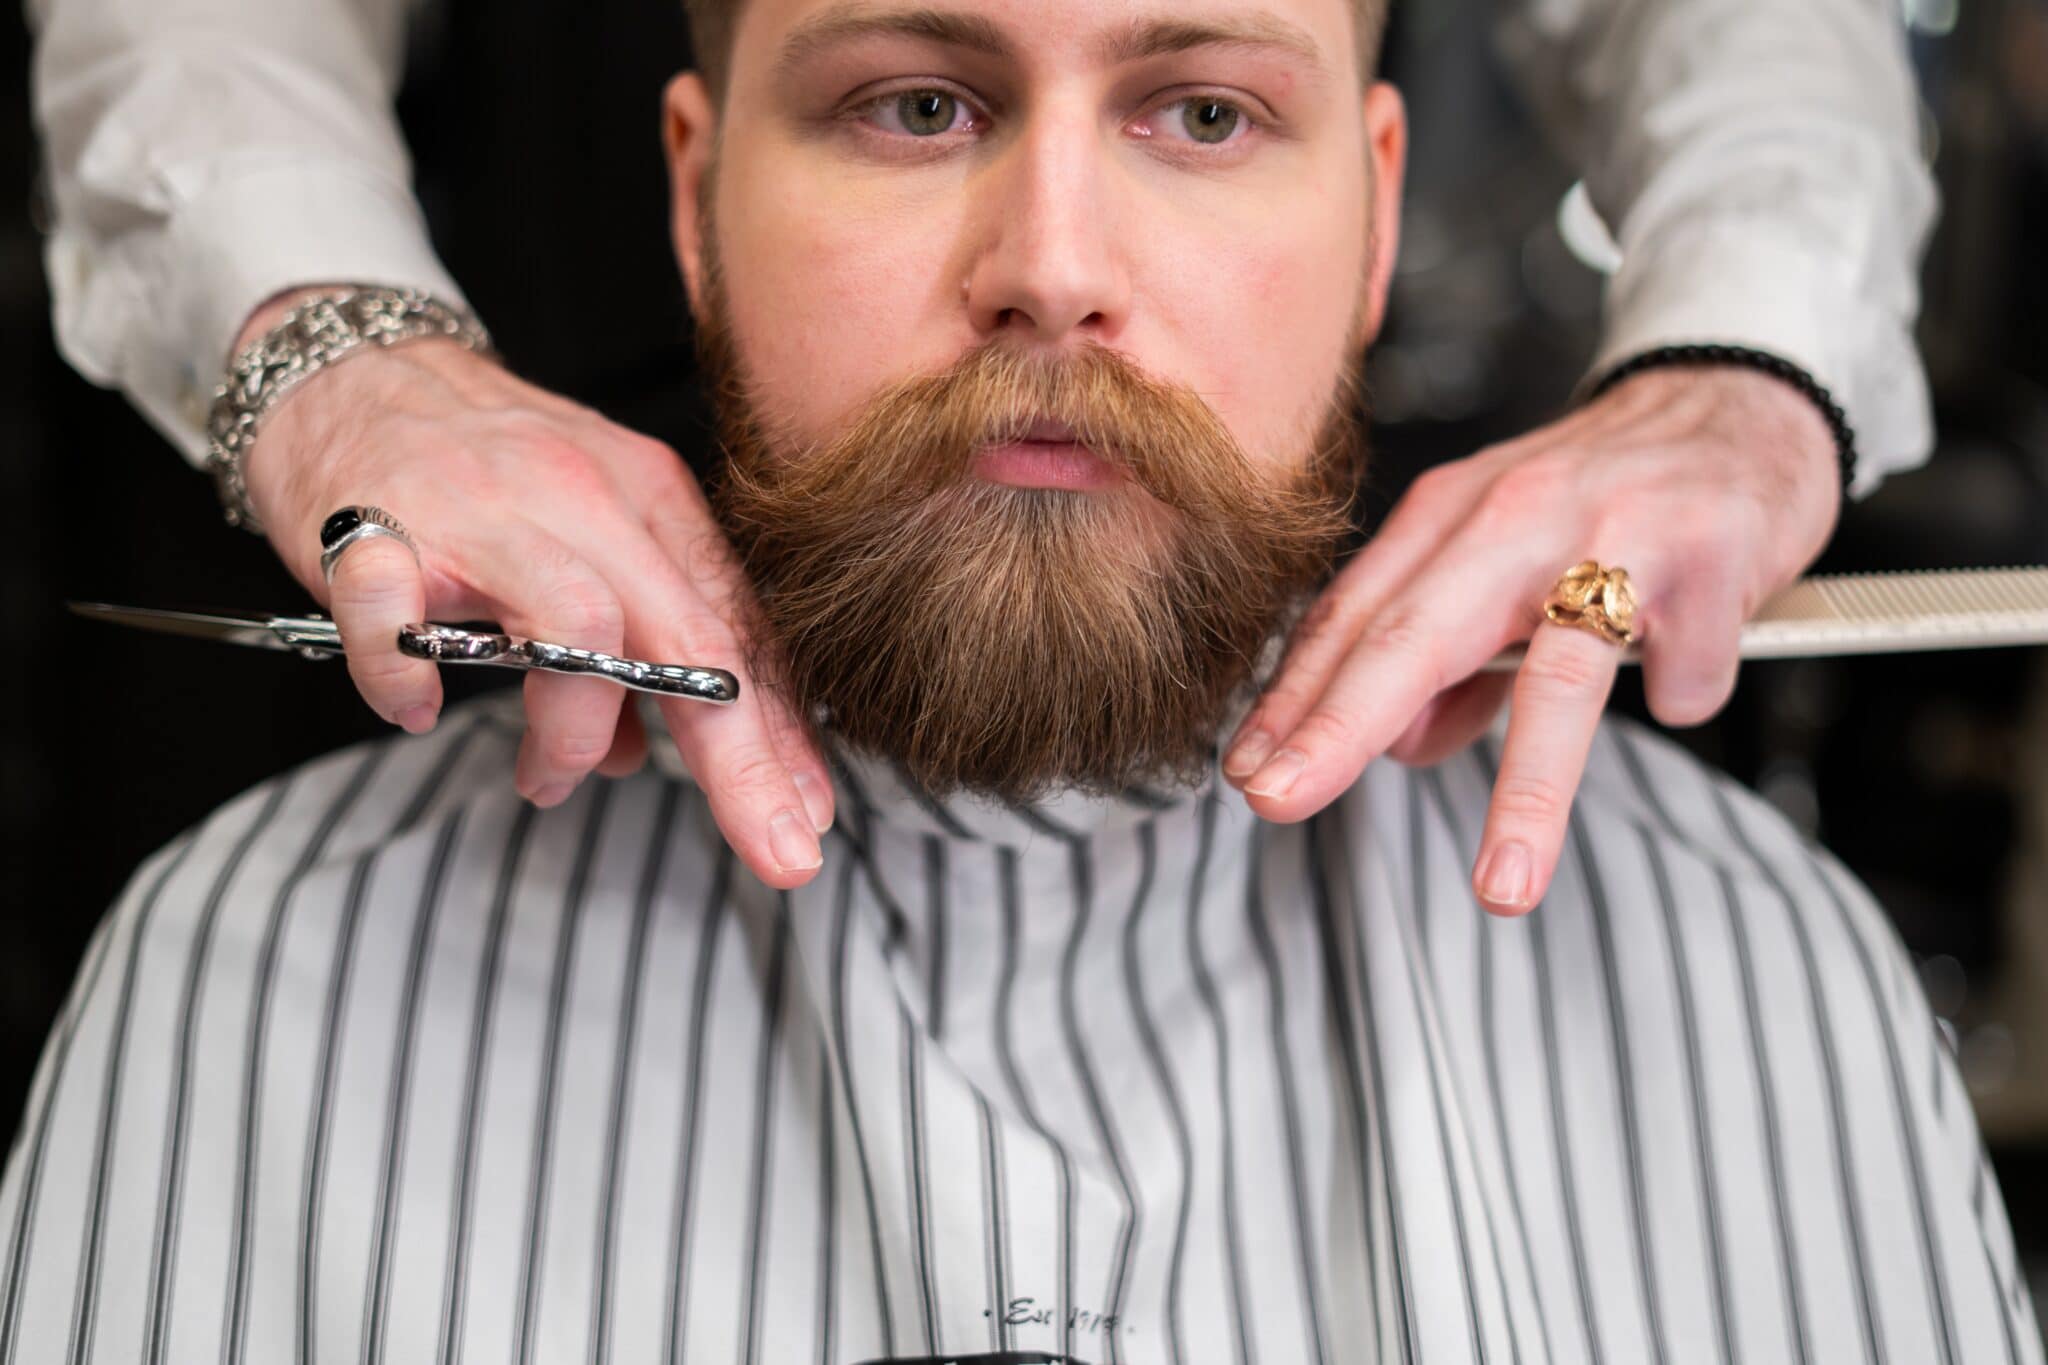 Gentleman getting his beard trimmed and groomed